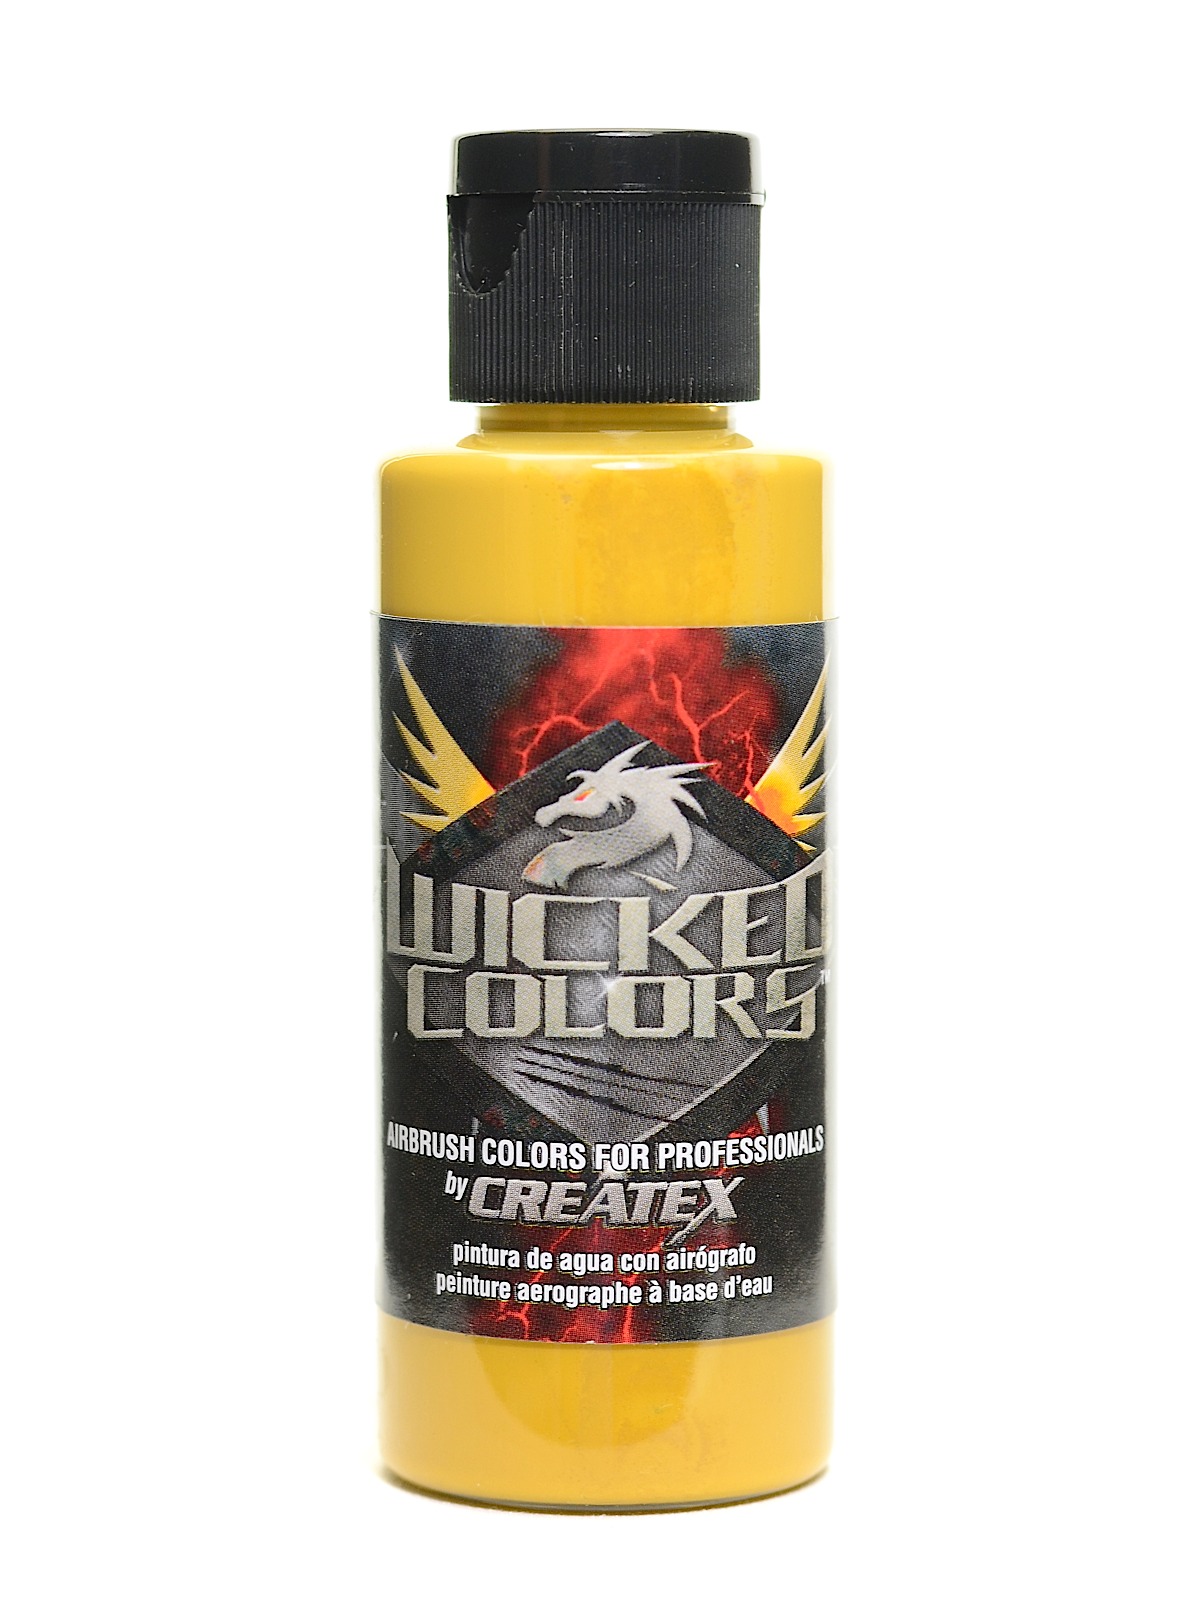 Wicked Colors Detail Raw Sienna 2 Oz.